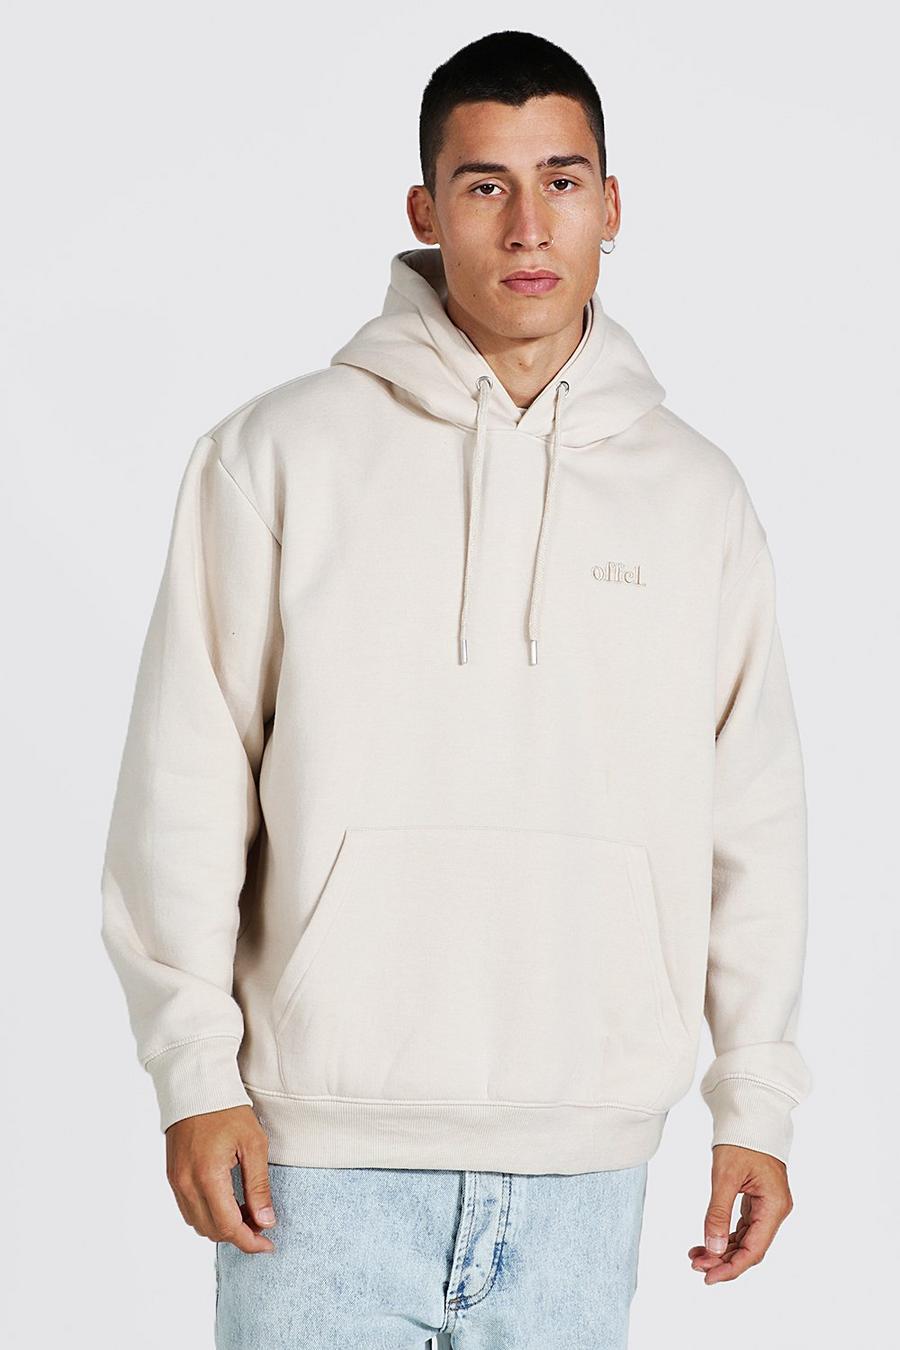 Pumice stone Offcl Oversized Over The Head Hoodie image number 1